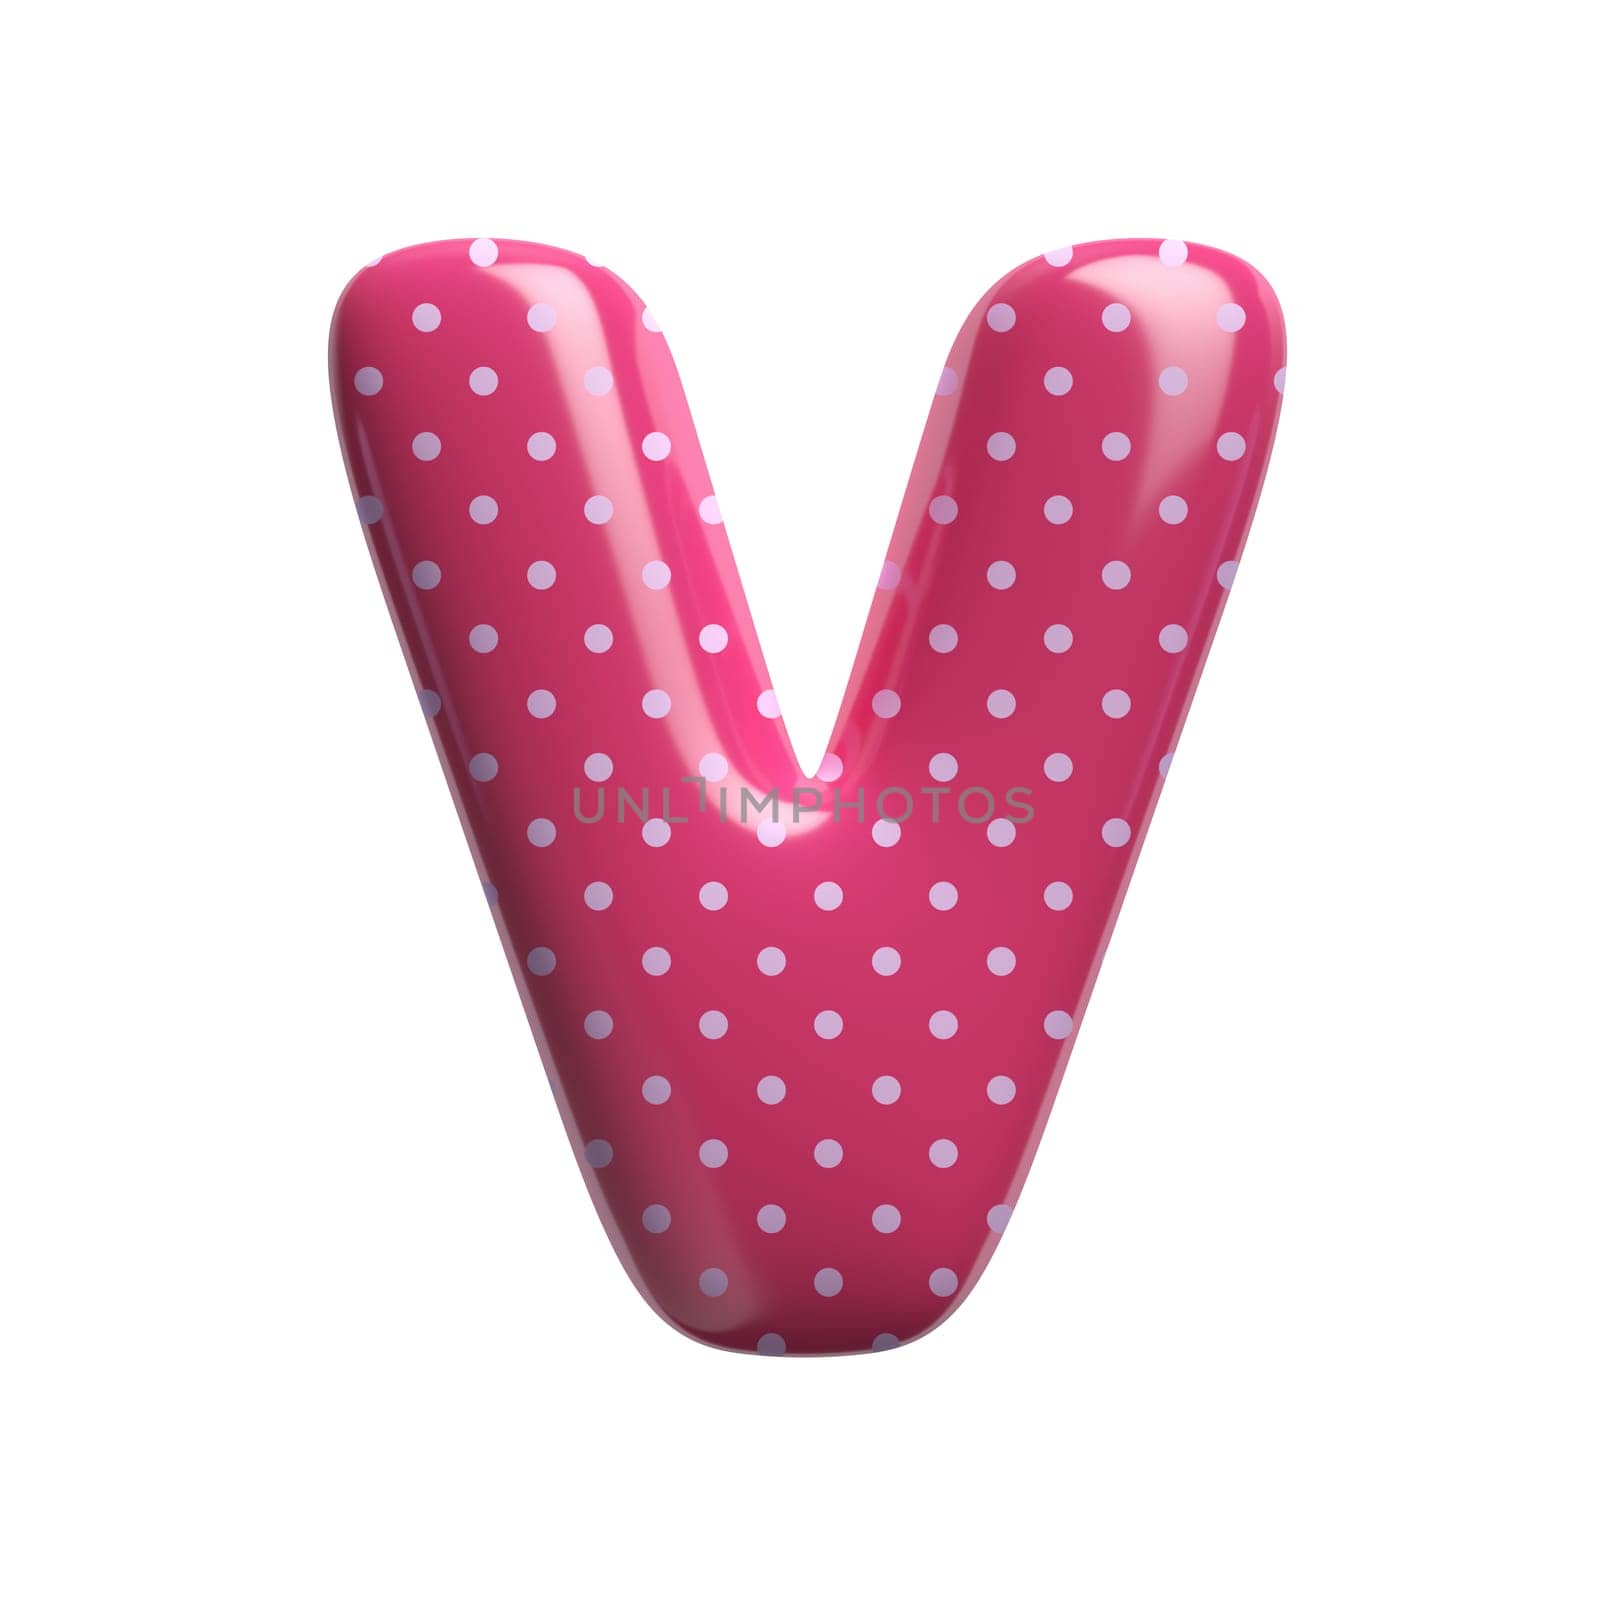 Polka dot letter V - Capital 3d pink retro font isolated on white background. This alphabet is perfect for creative illustrations related but not limited to Fashion, retro design, decoration...